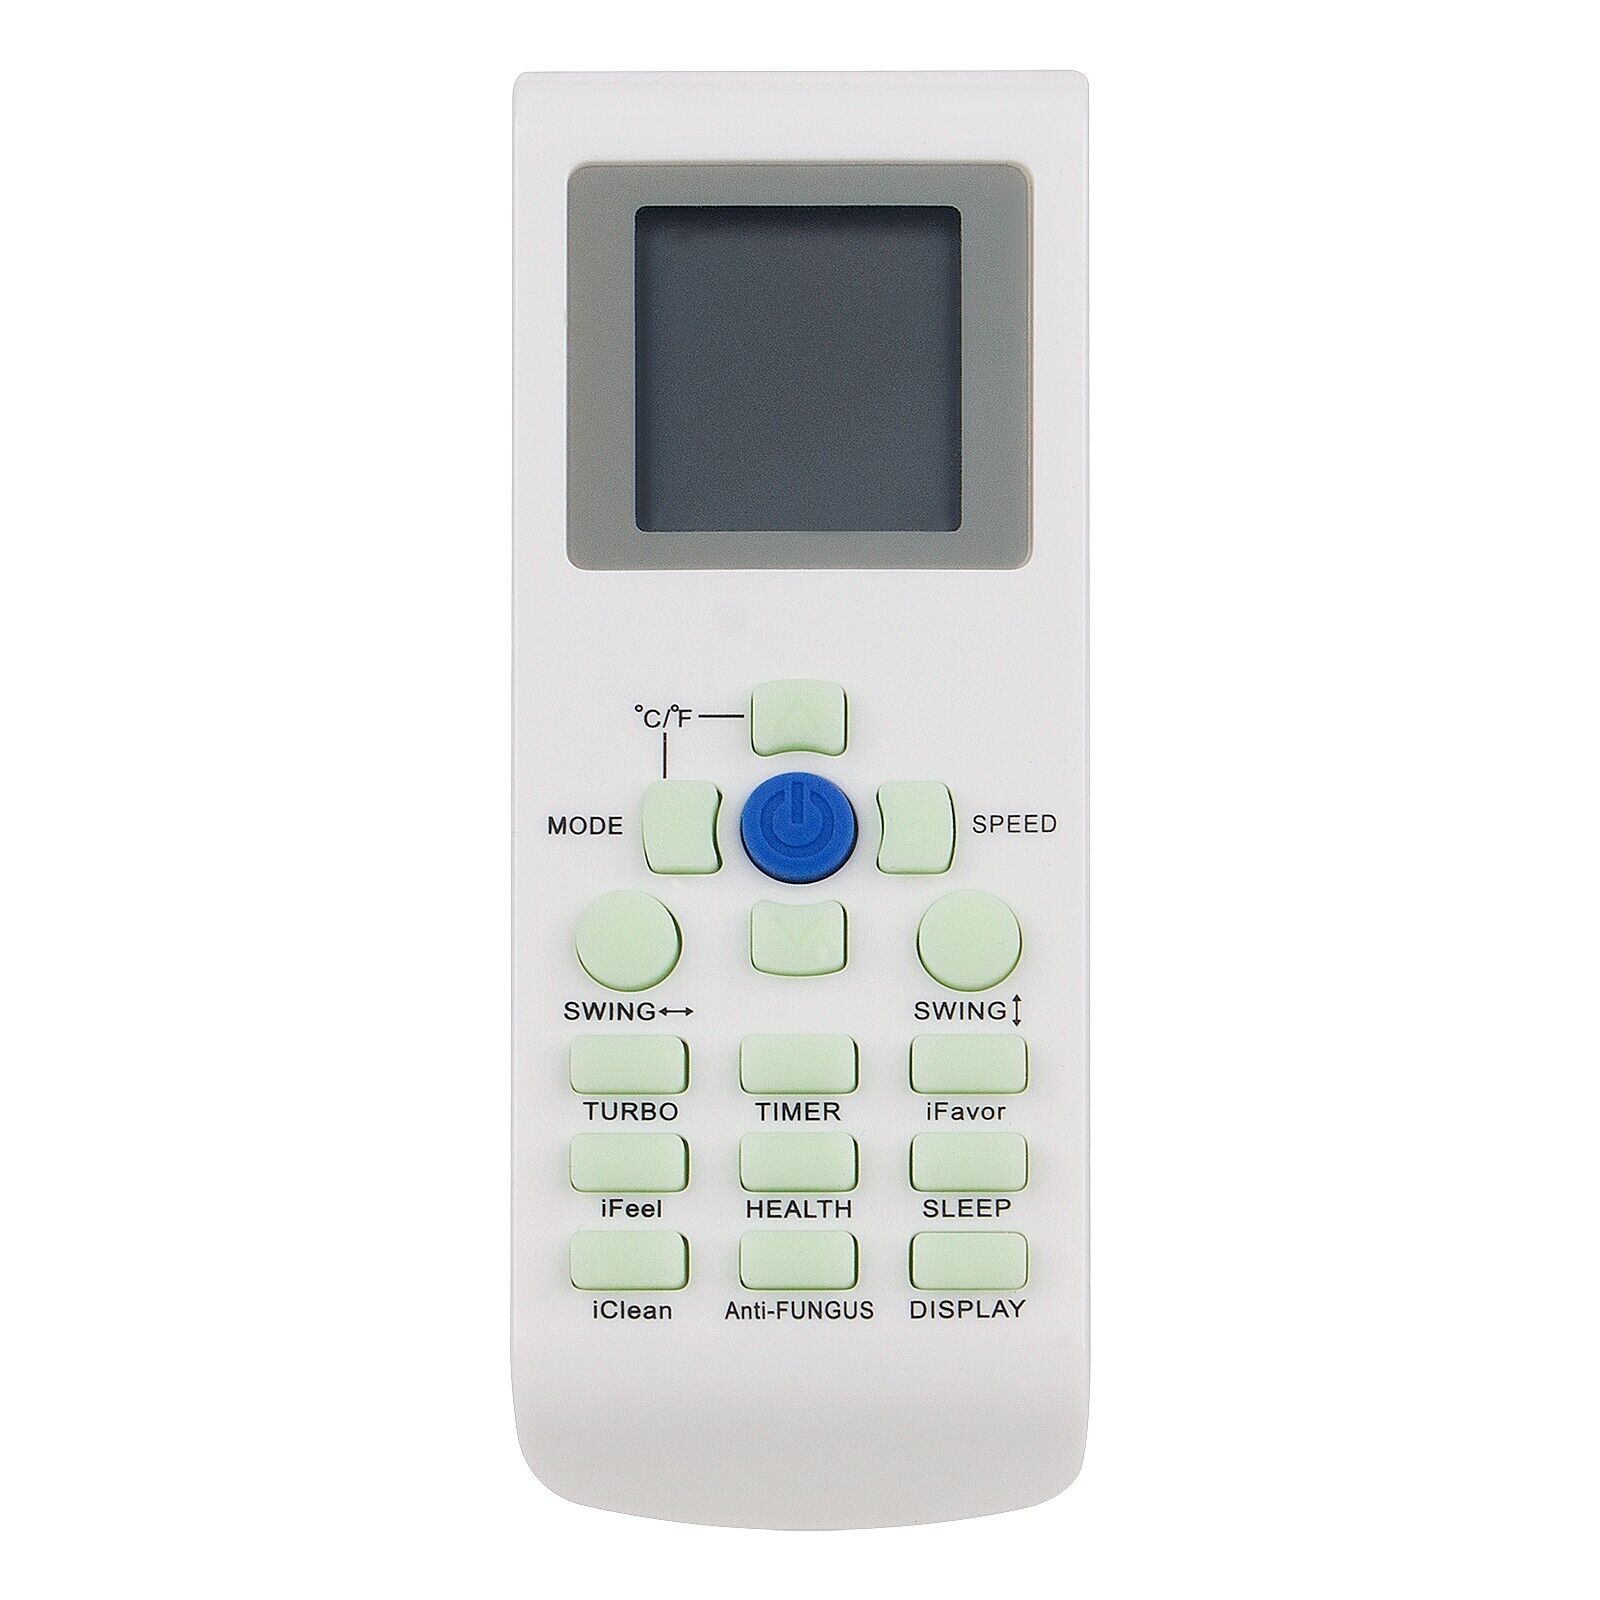 YKR-P/001E Replace Remote Control Fit for York AUX Air Conditioner YKR-P/002E